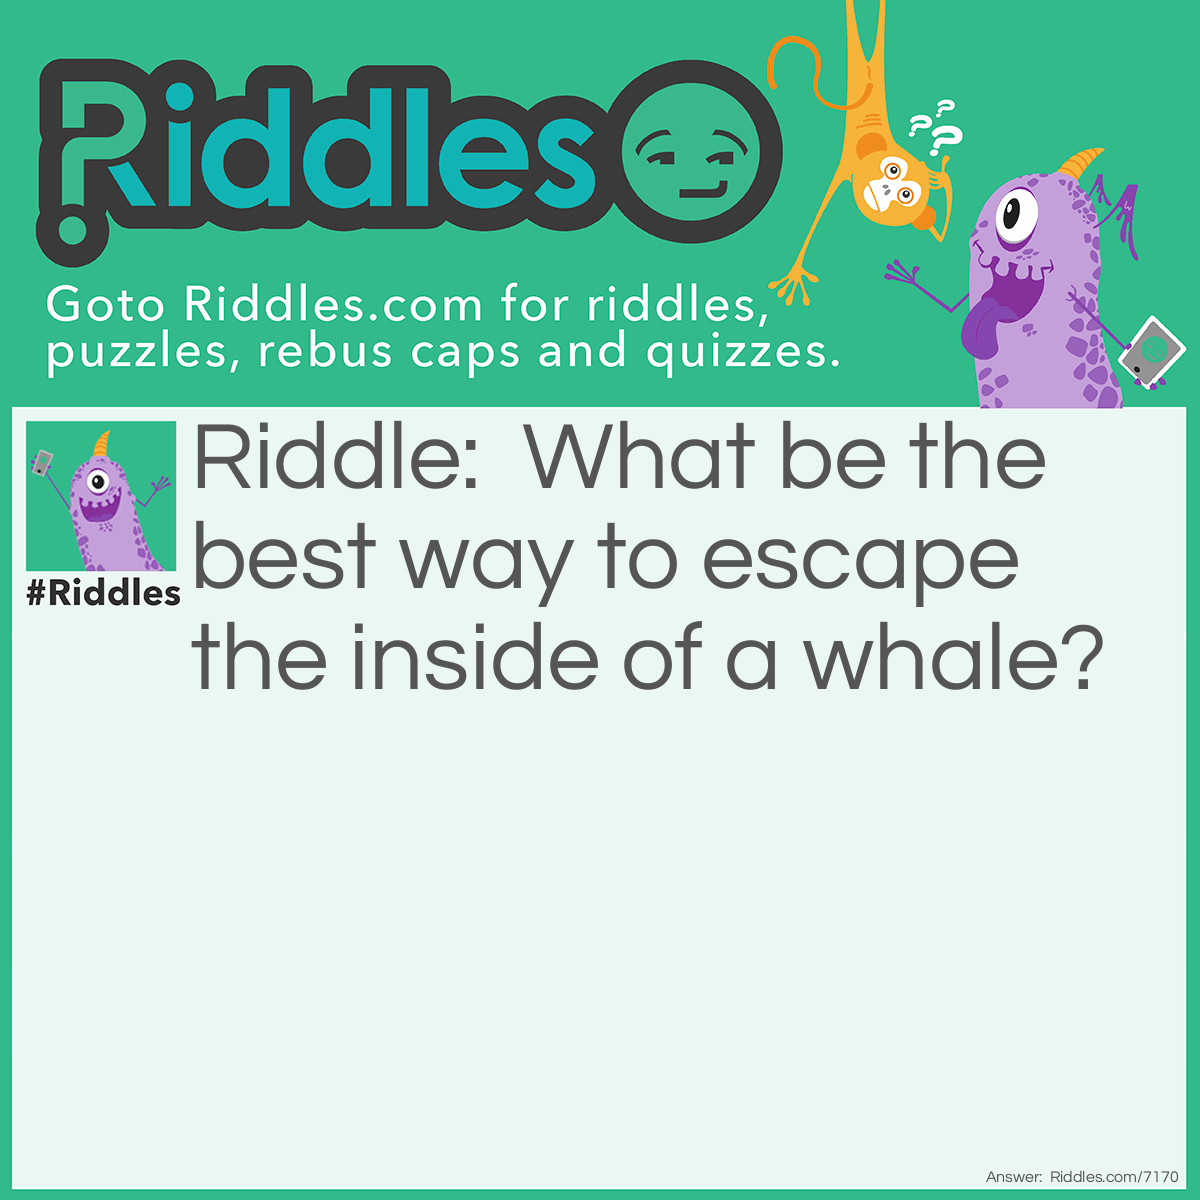 Riddle: What be the best way to escape the inside of a whale? Answer: Running as hard as you can until you’re all pooped out.